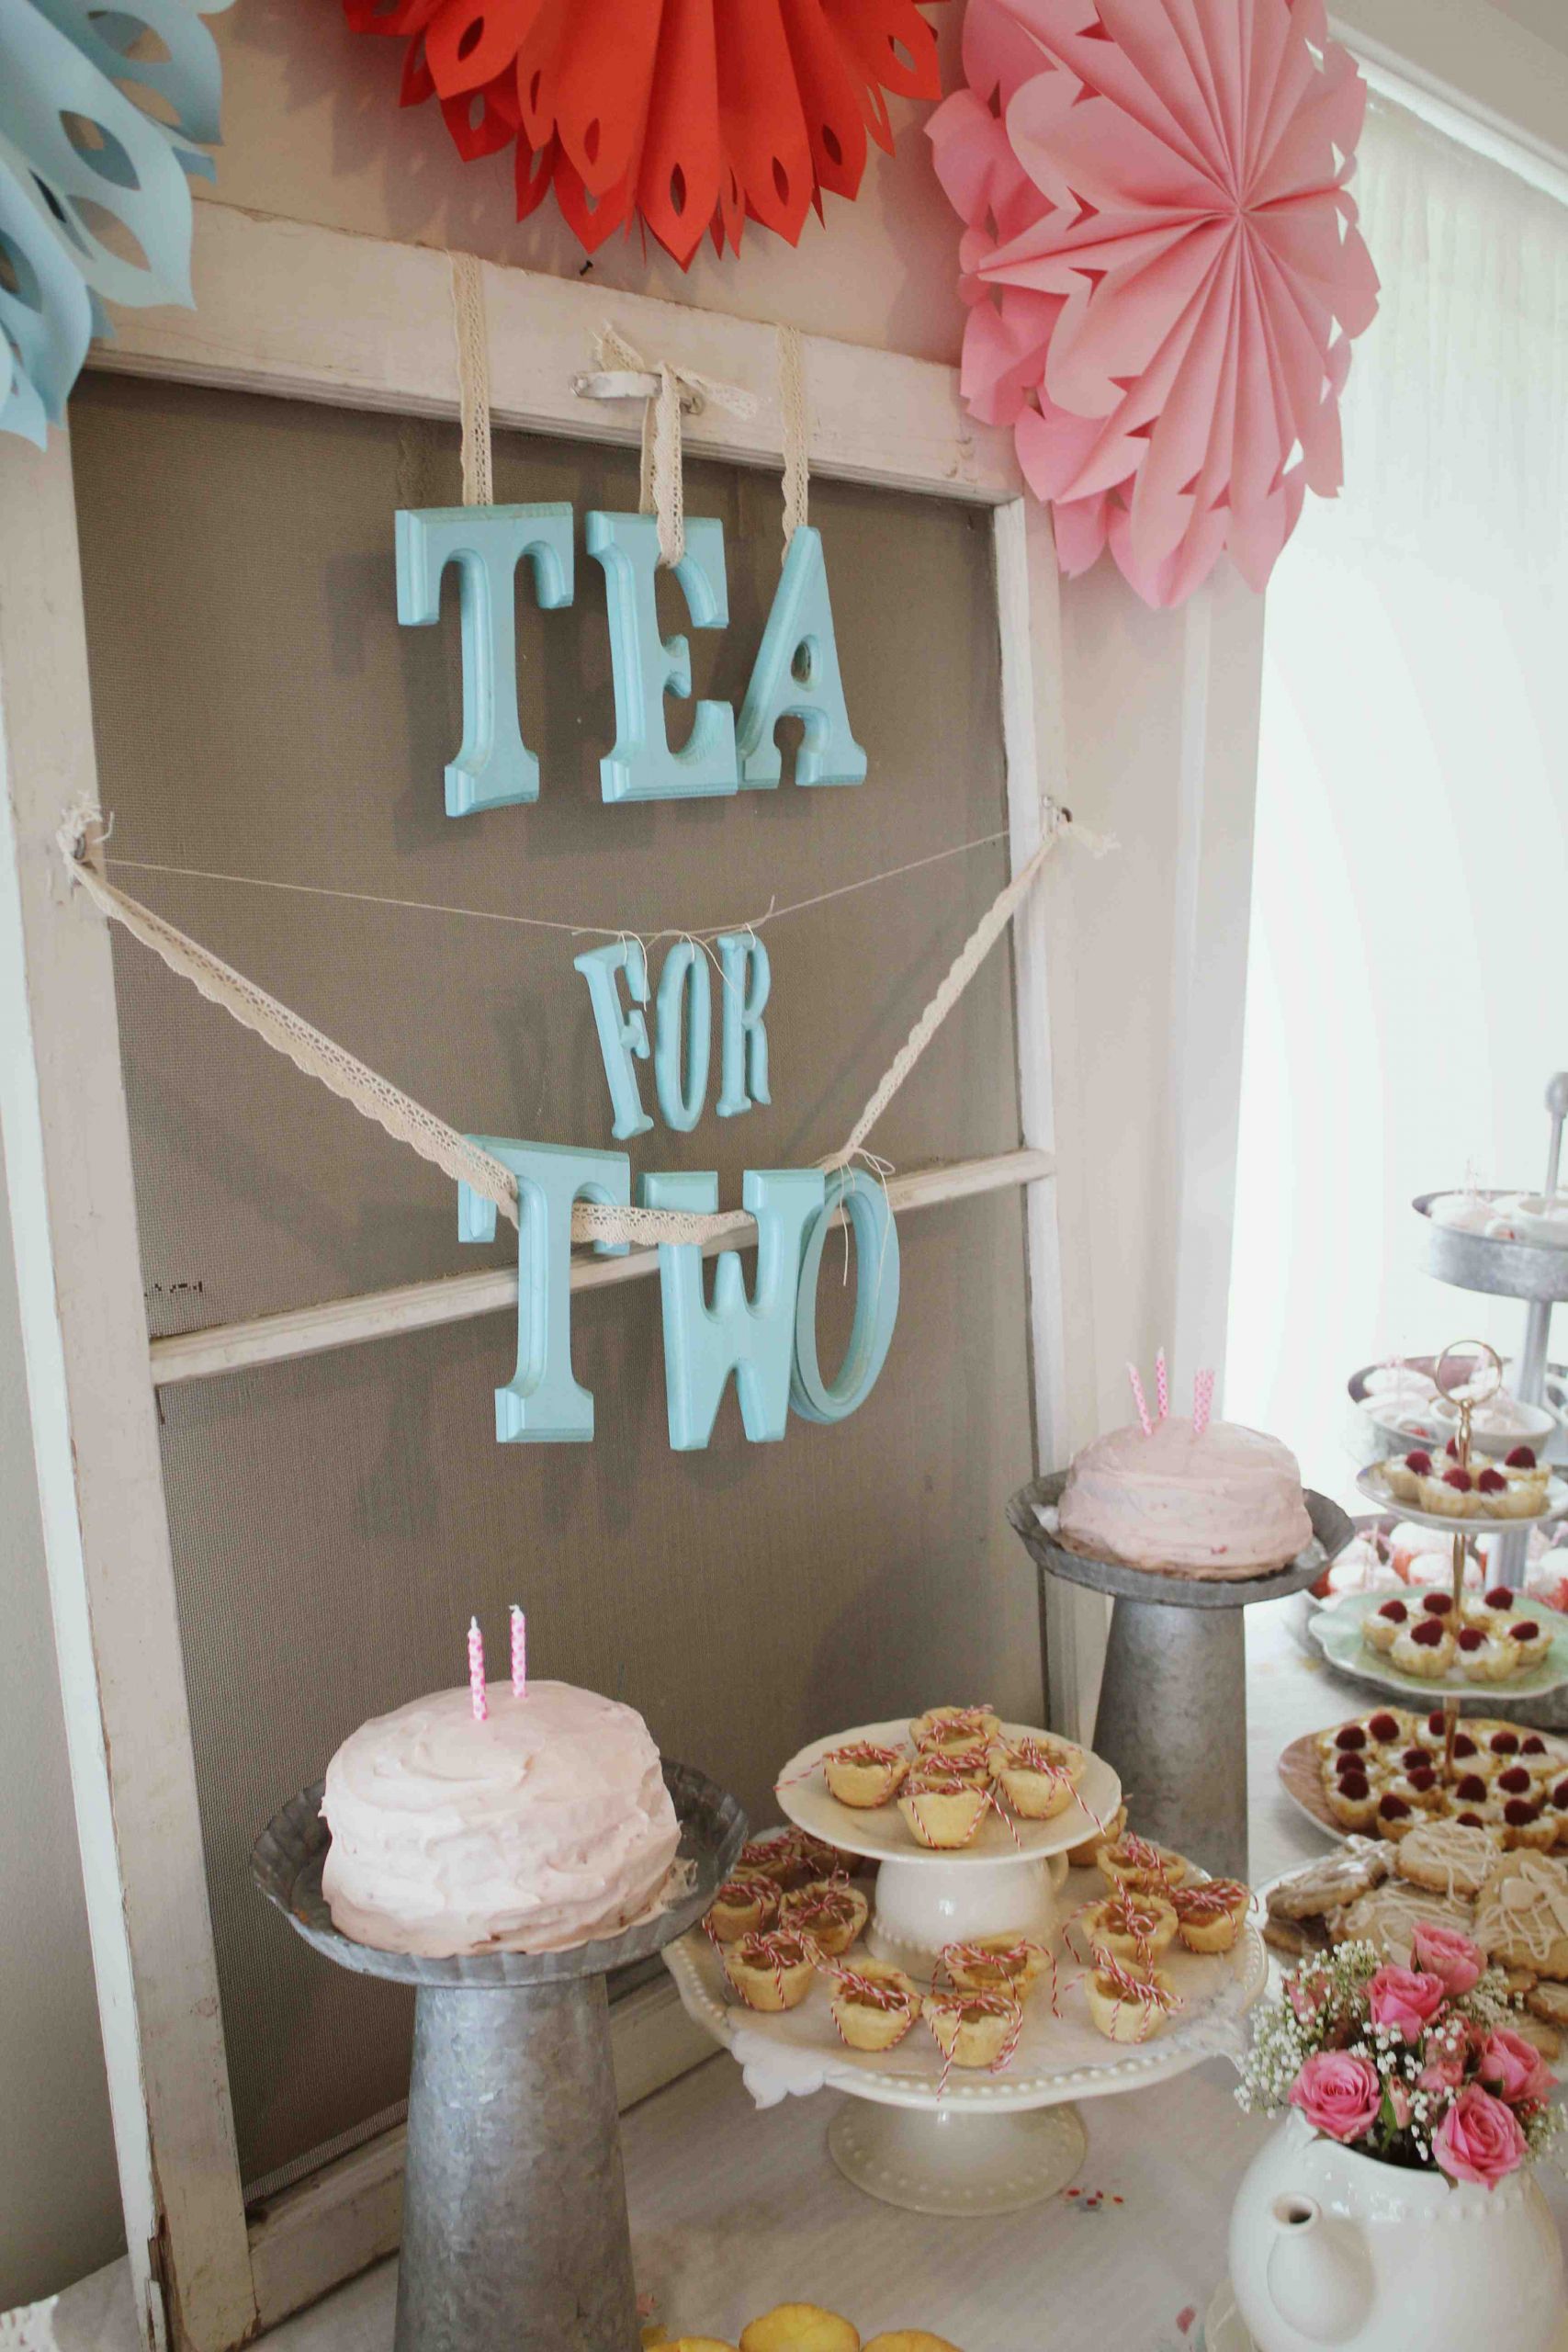 Tea For Two Party Ideas
 A “Tea For Two” Birthday Party